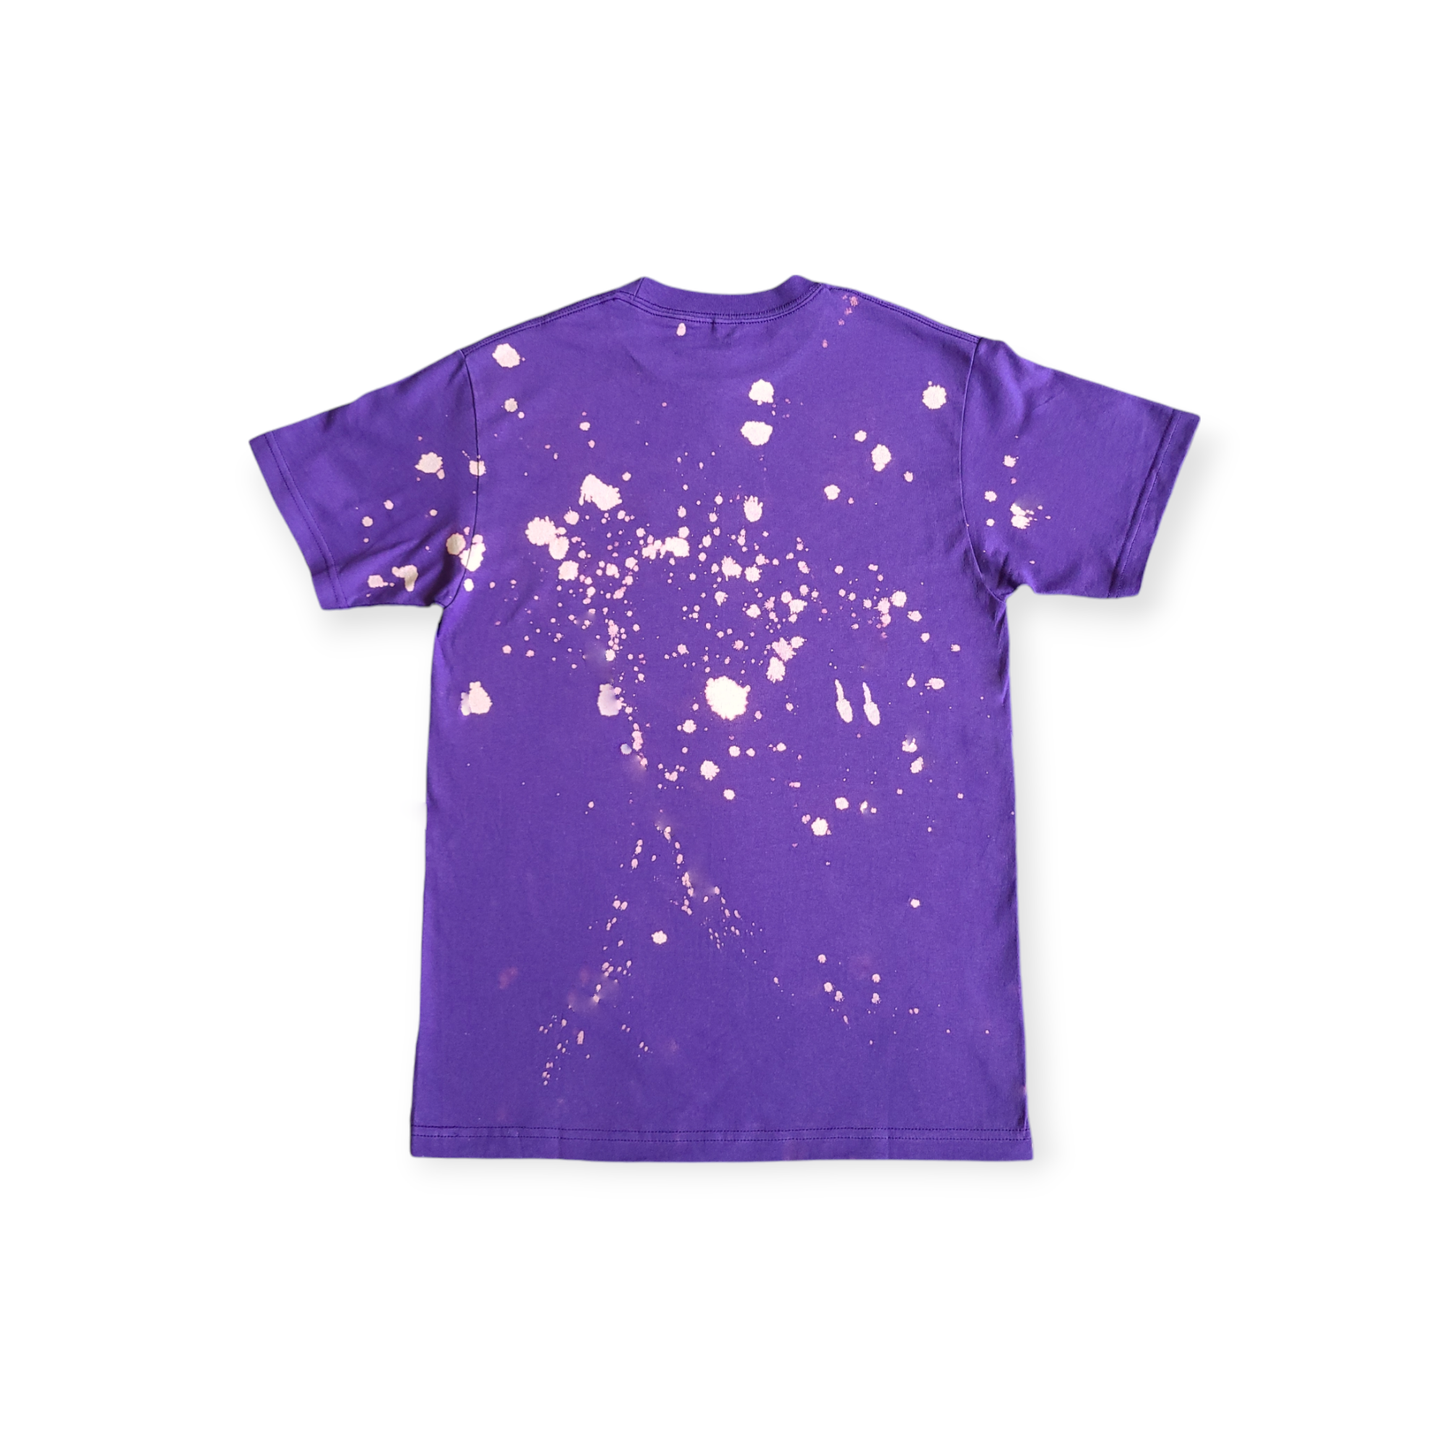 The Stained Brain - Purple Haze (Stained) Unisex T-Shirt